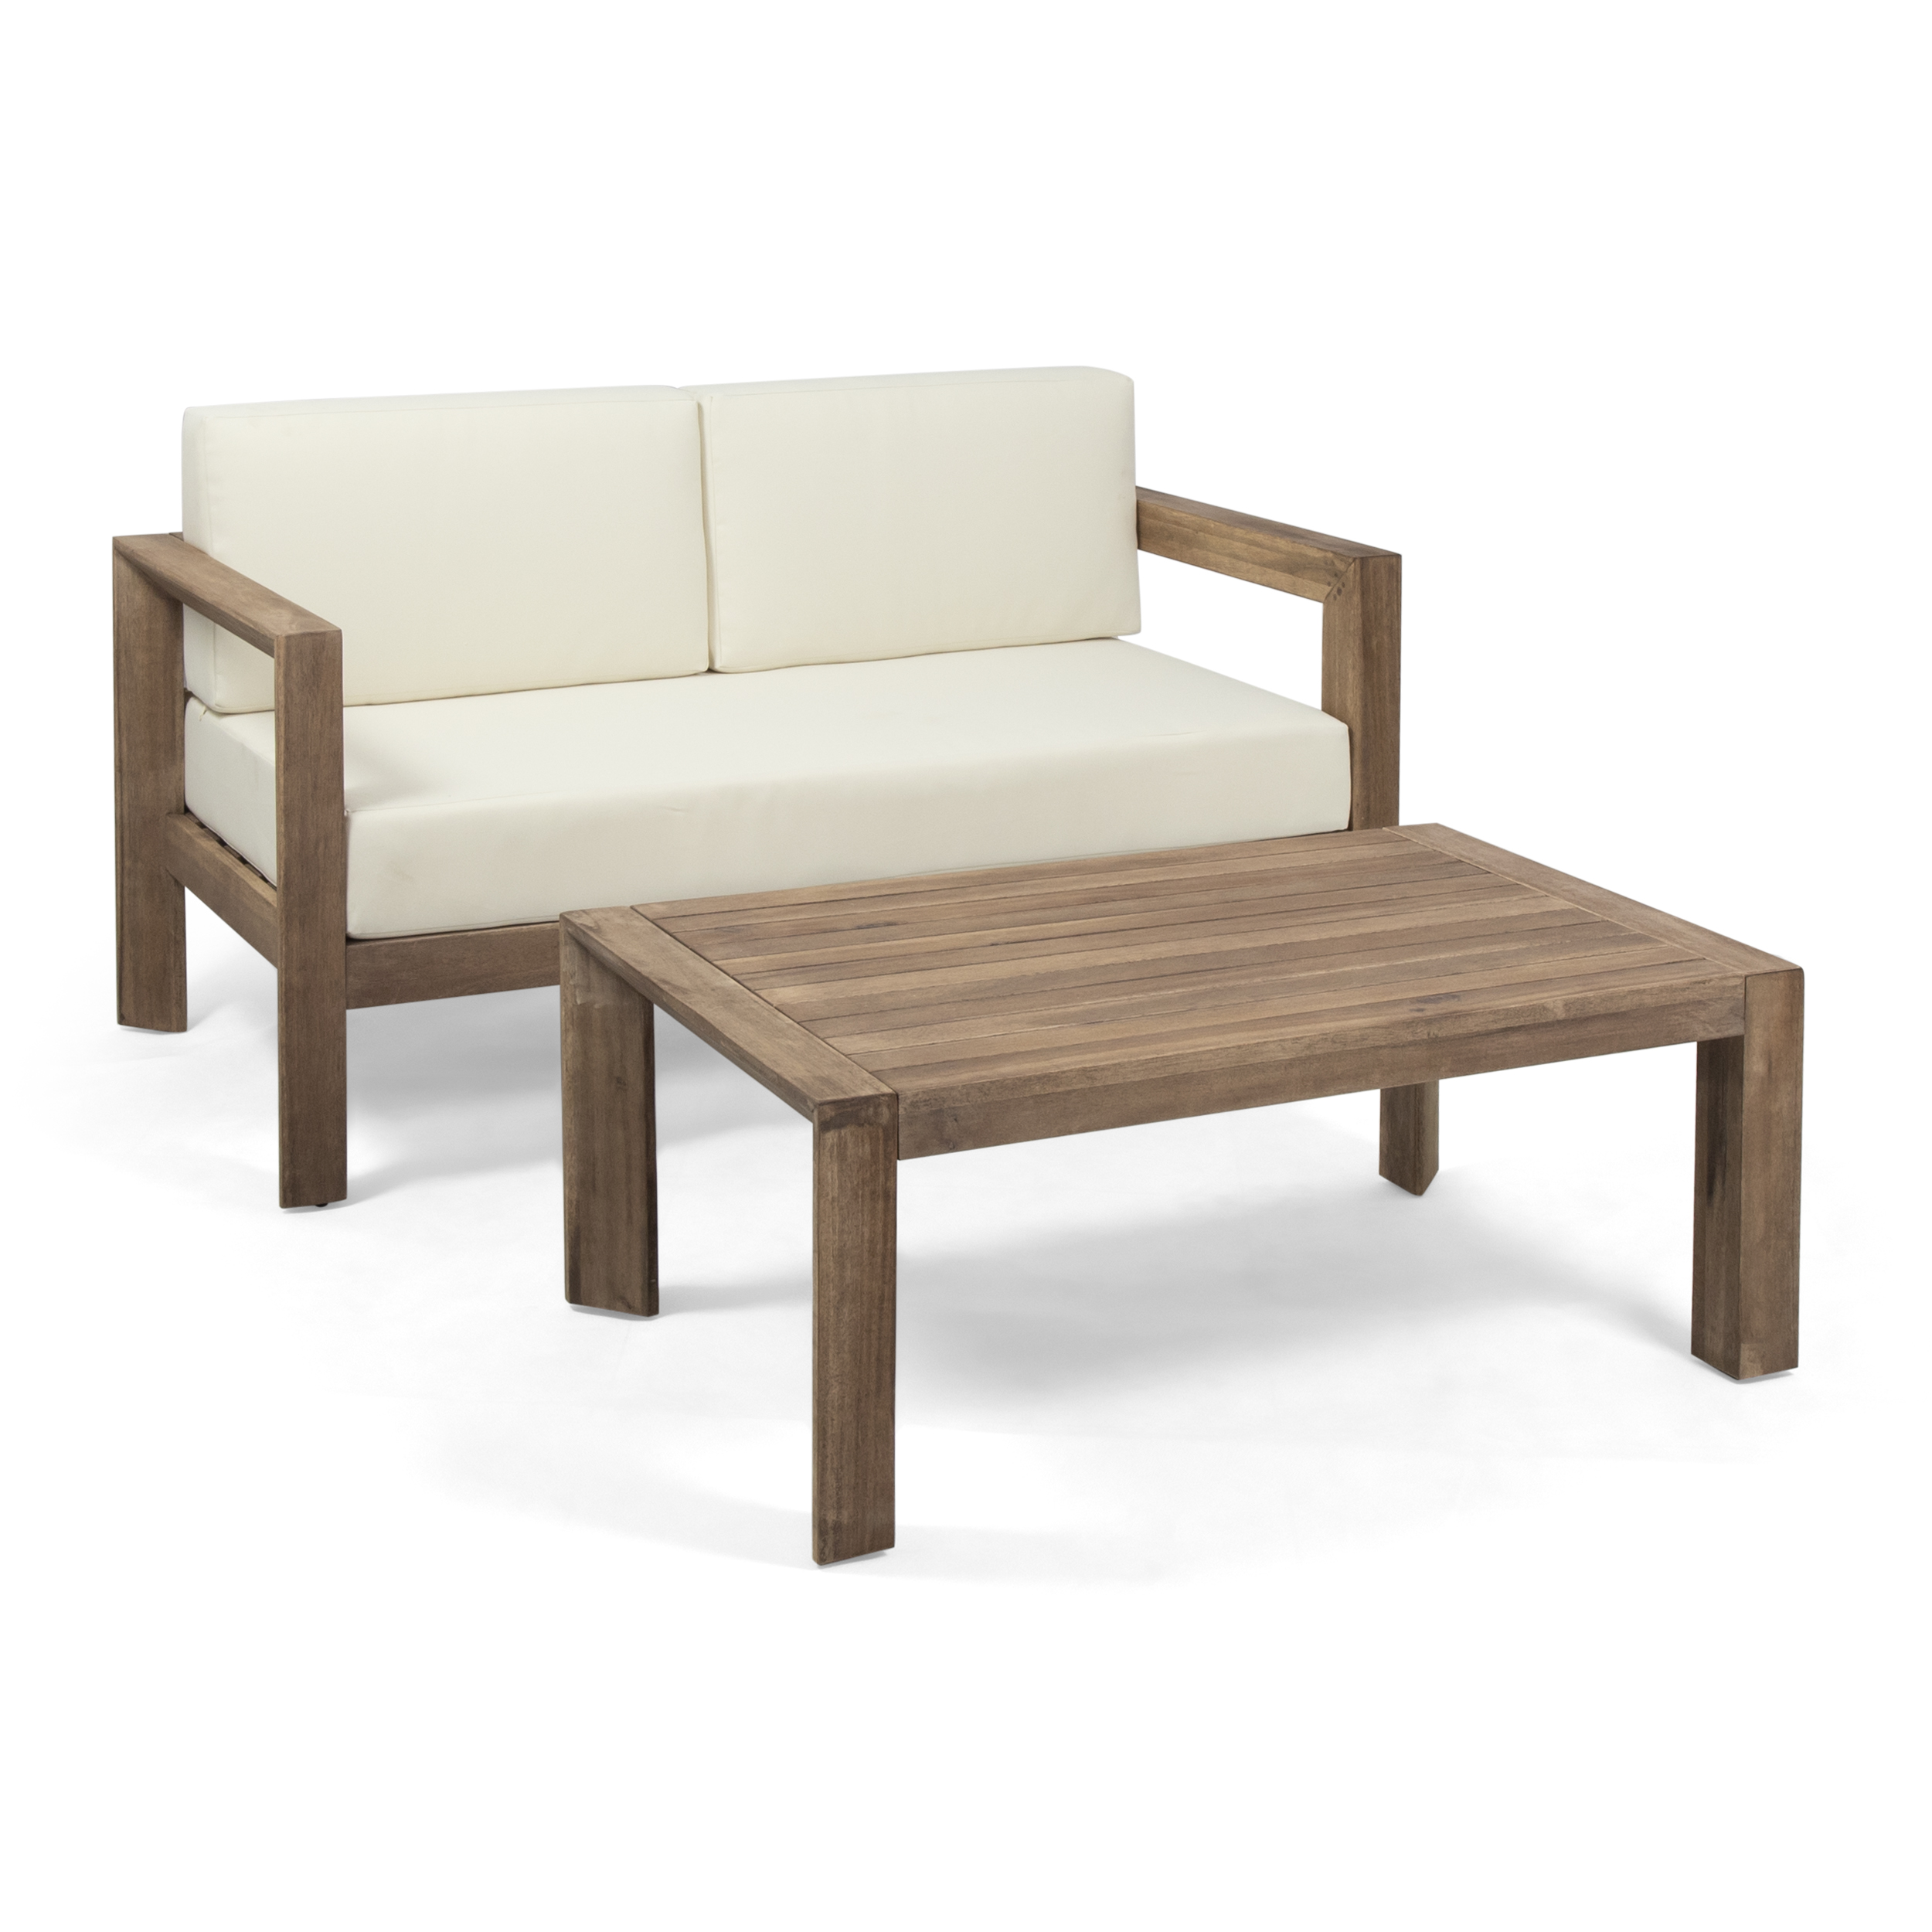 Noble House Genser Outdoor Wood Loveseat and Coffee Table in Beige - image 3 of 10